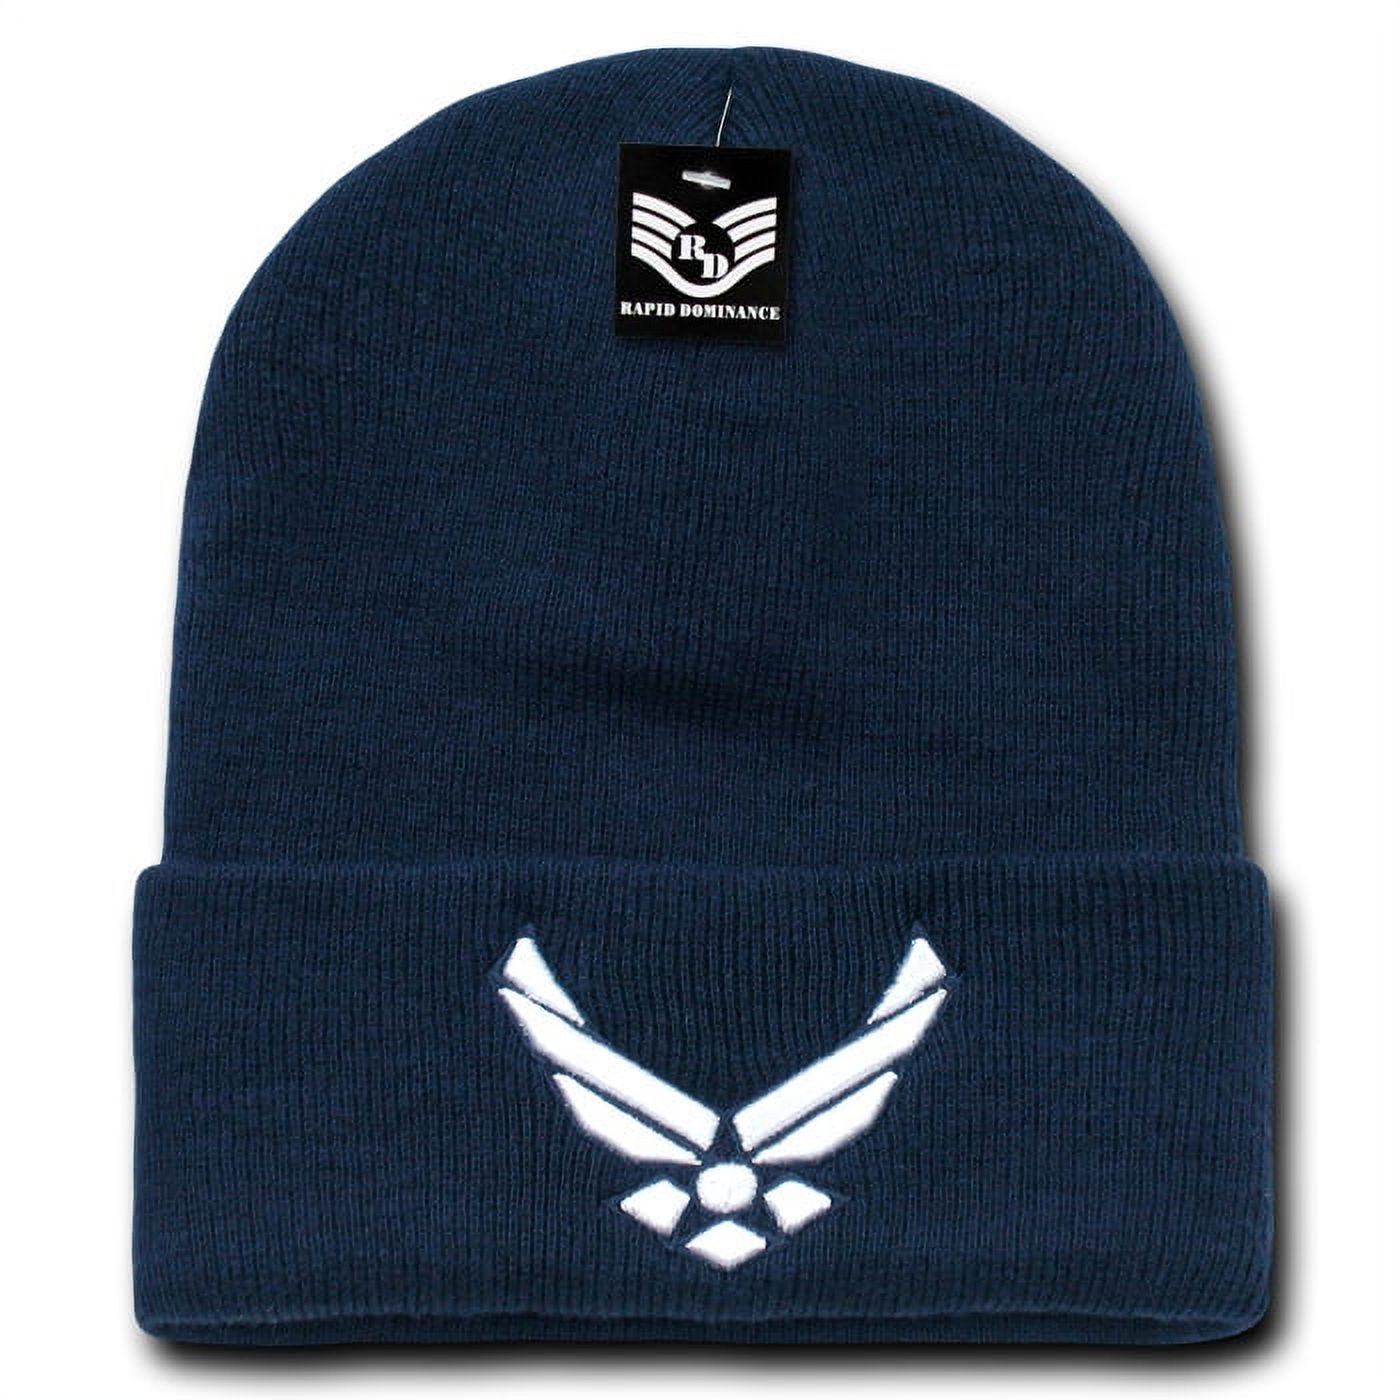 Rapid Dominance Air Force Emblem Military Long Cuff Mens Beanie Cap [Navy Blue] - image 3 of 7